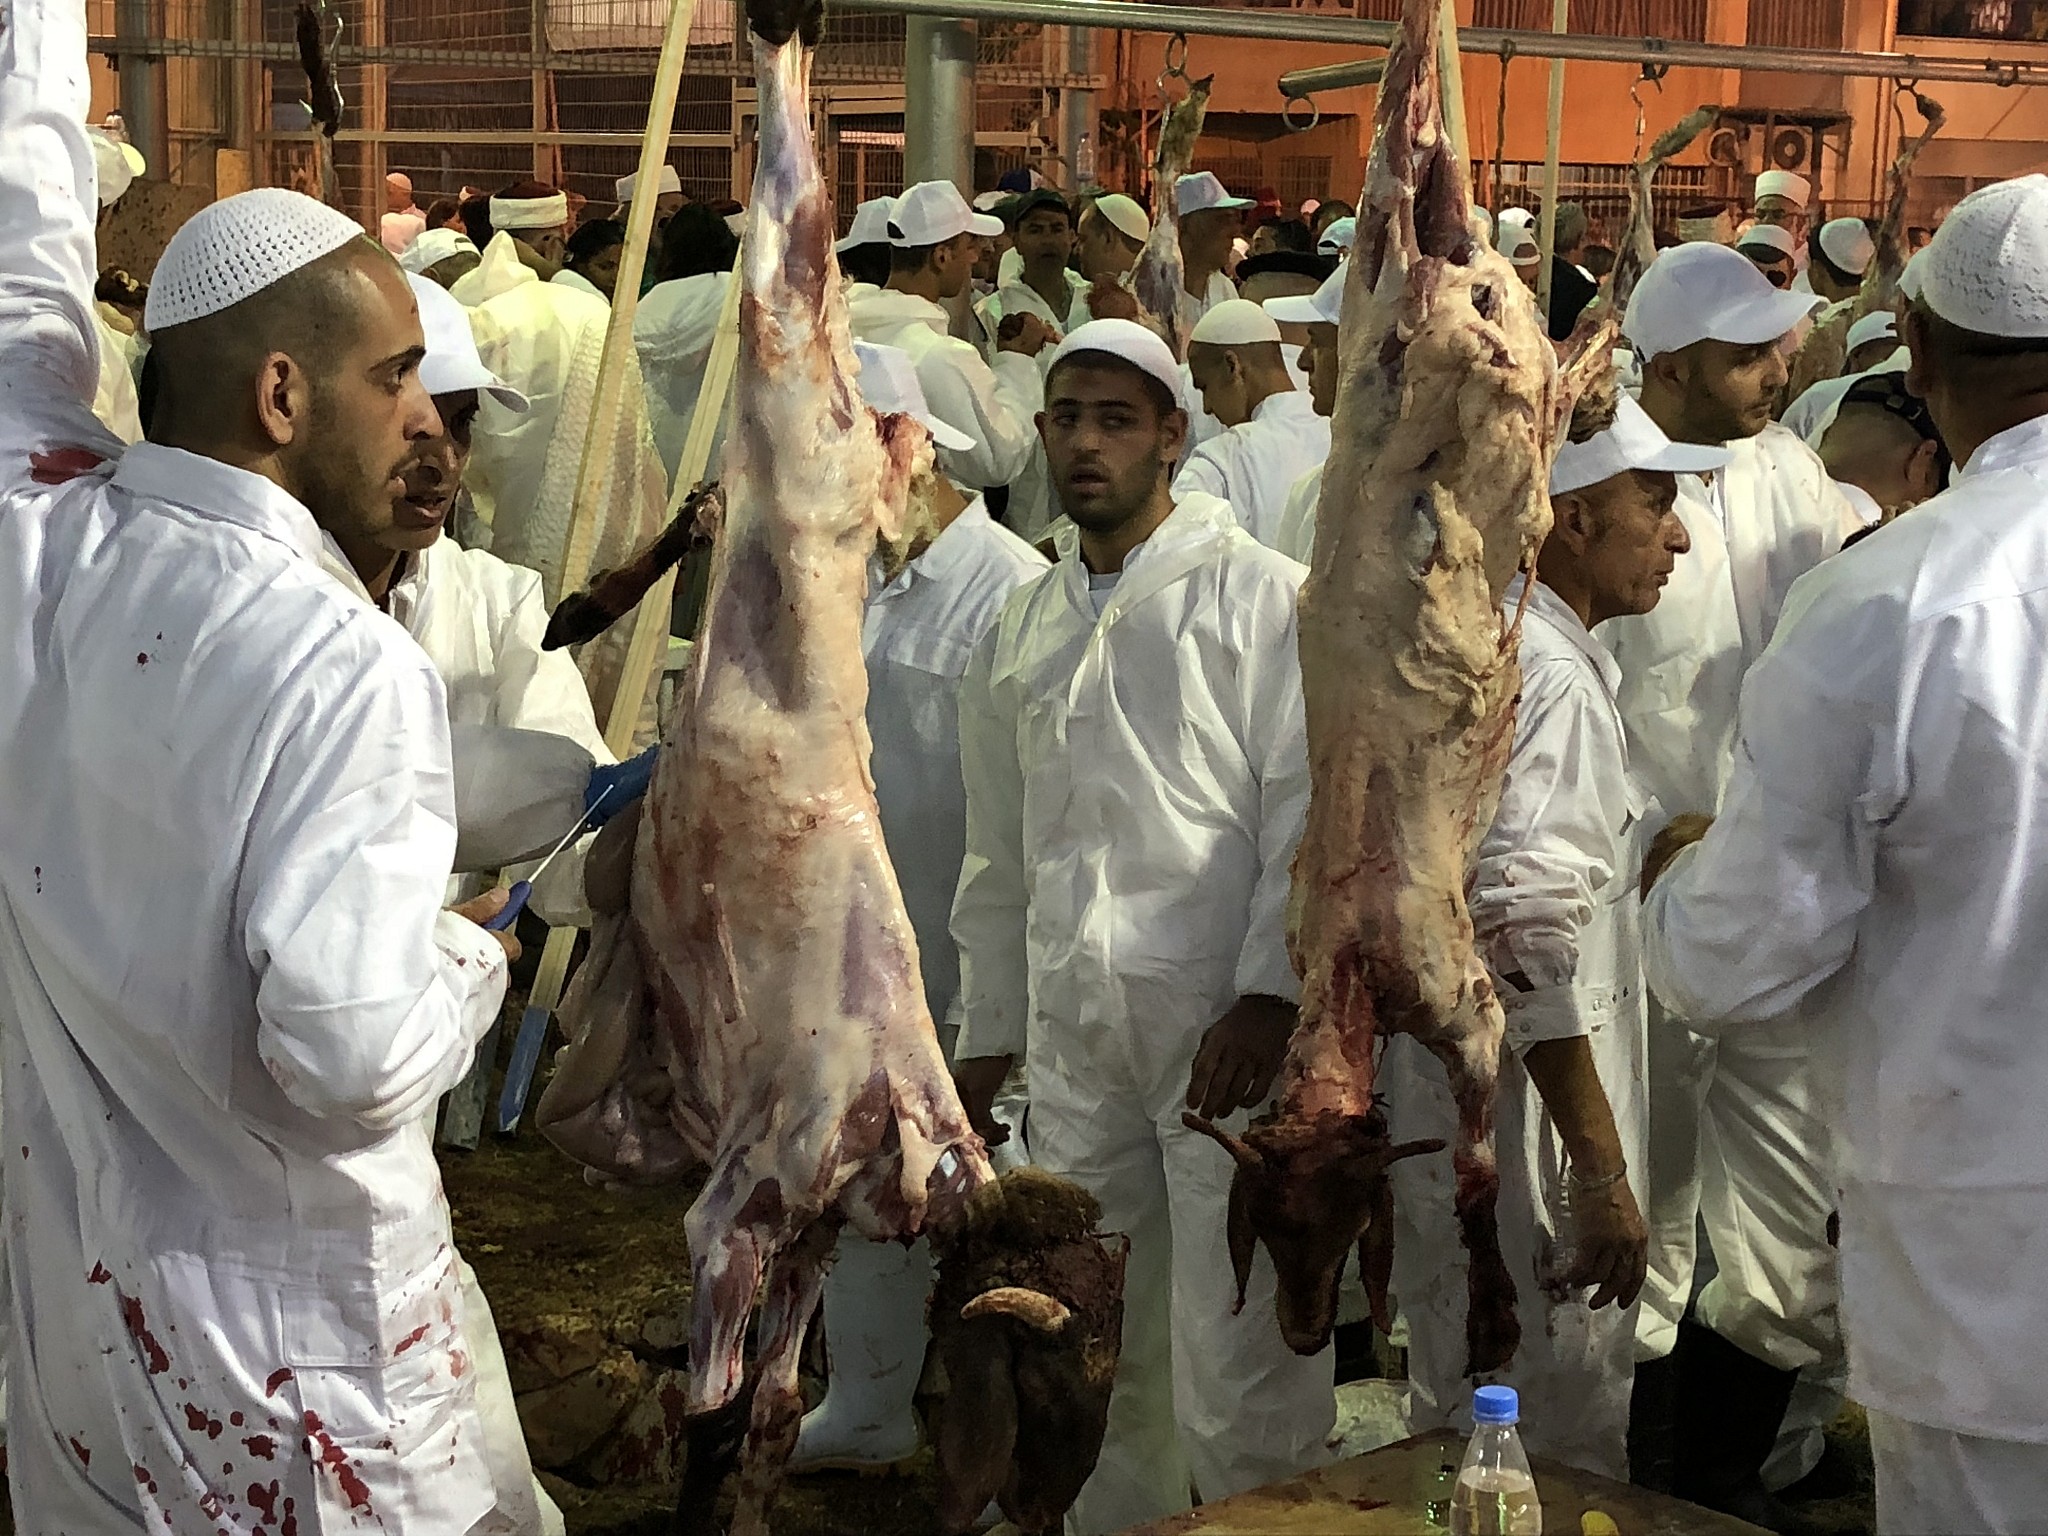 Samaritans take part in the traditional Passover sacrifice ceremony, where sheep and goats are slaughtered, at Mount Gerizim near the northern West Bank city of Nablus on April 29, 2018. (Jacob Magid/Times of Israel)